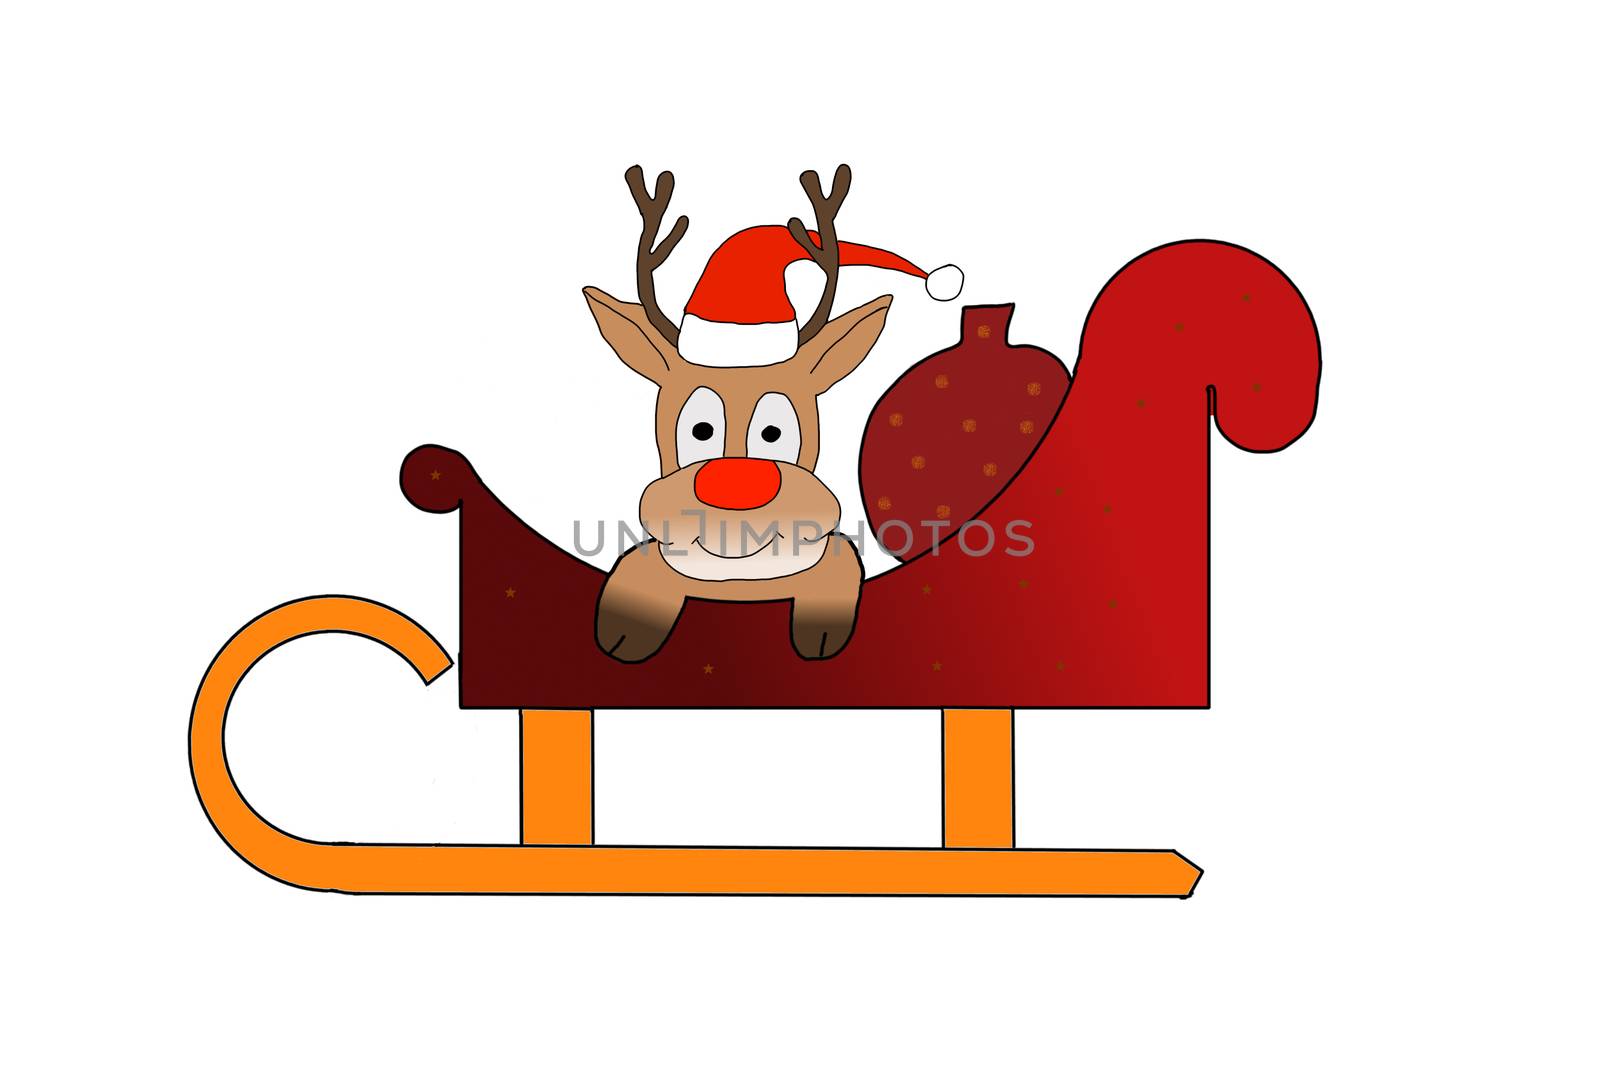 Rudolph sitting in Santas sleigh on white background by gwolters